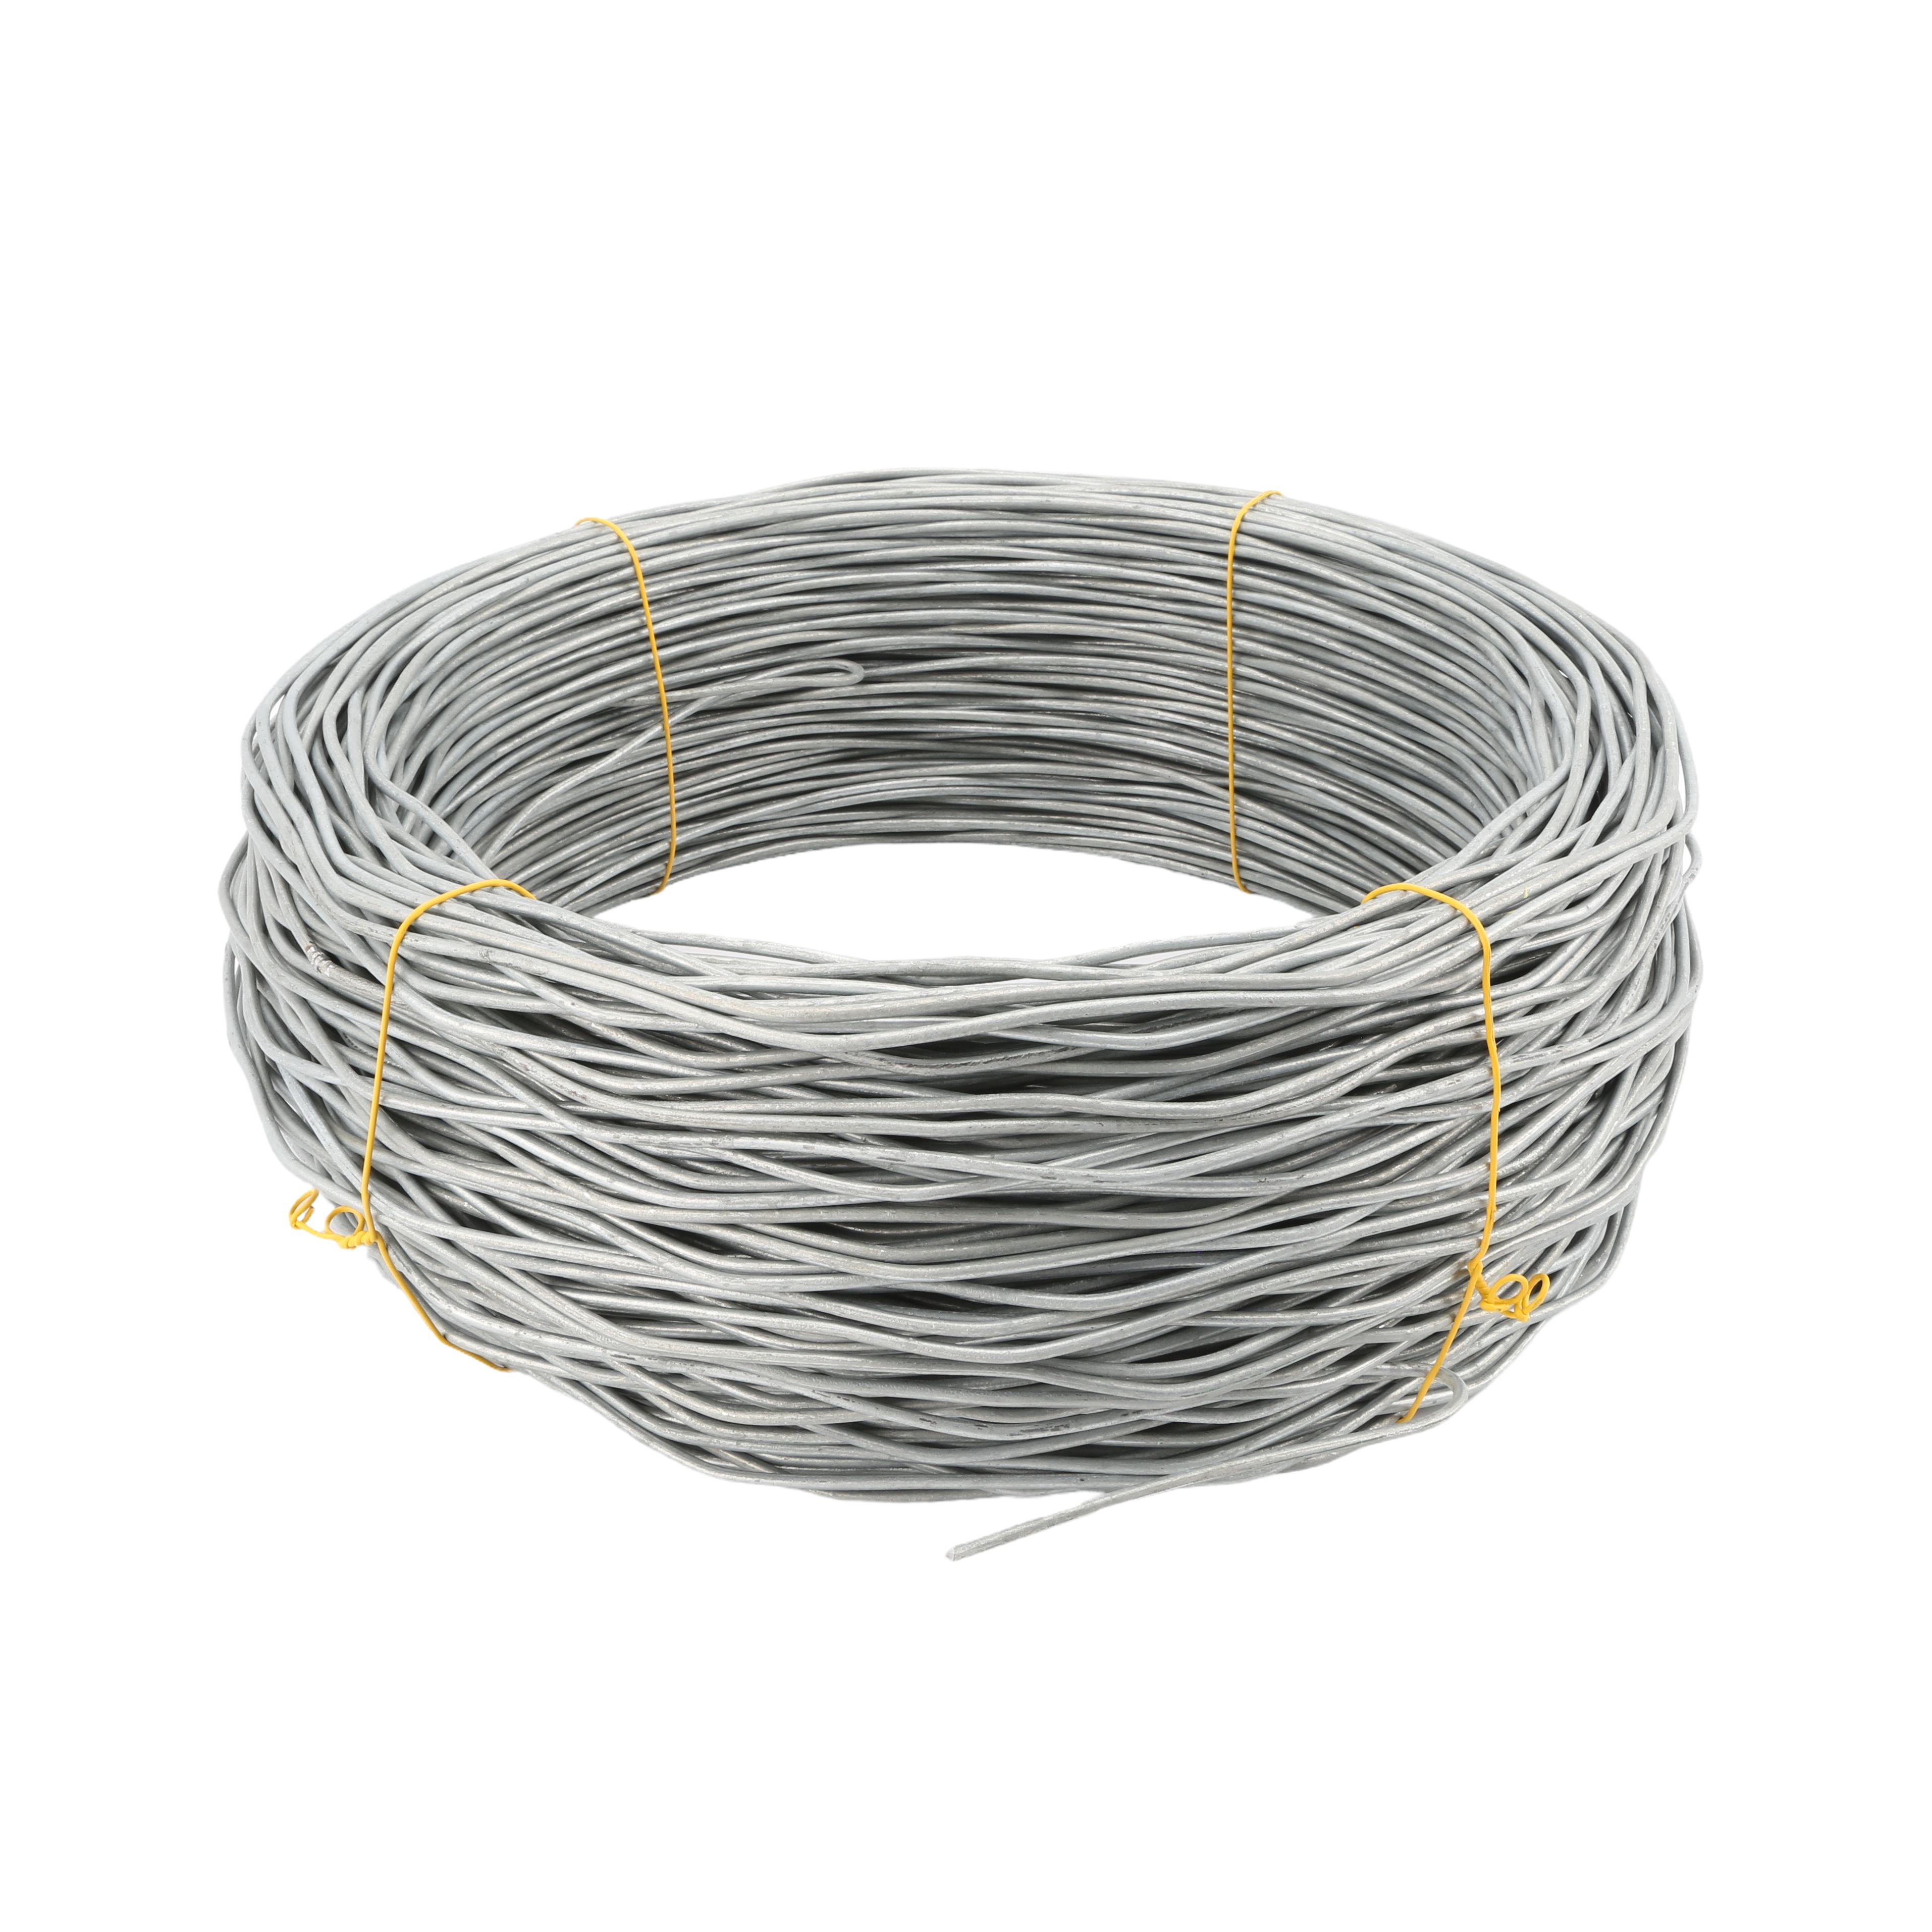 Chain Link 1000' Spring Crimped Tension Wire [7 Gauge] (Galvanized Steel) -  Chain Link Fencing Tension Wires - Chain Link Fittings